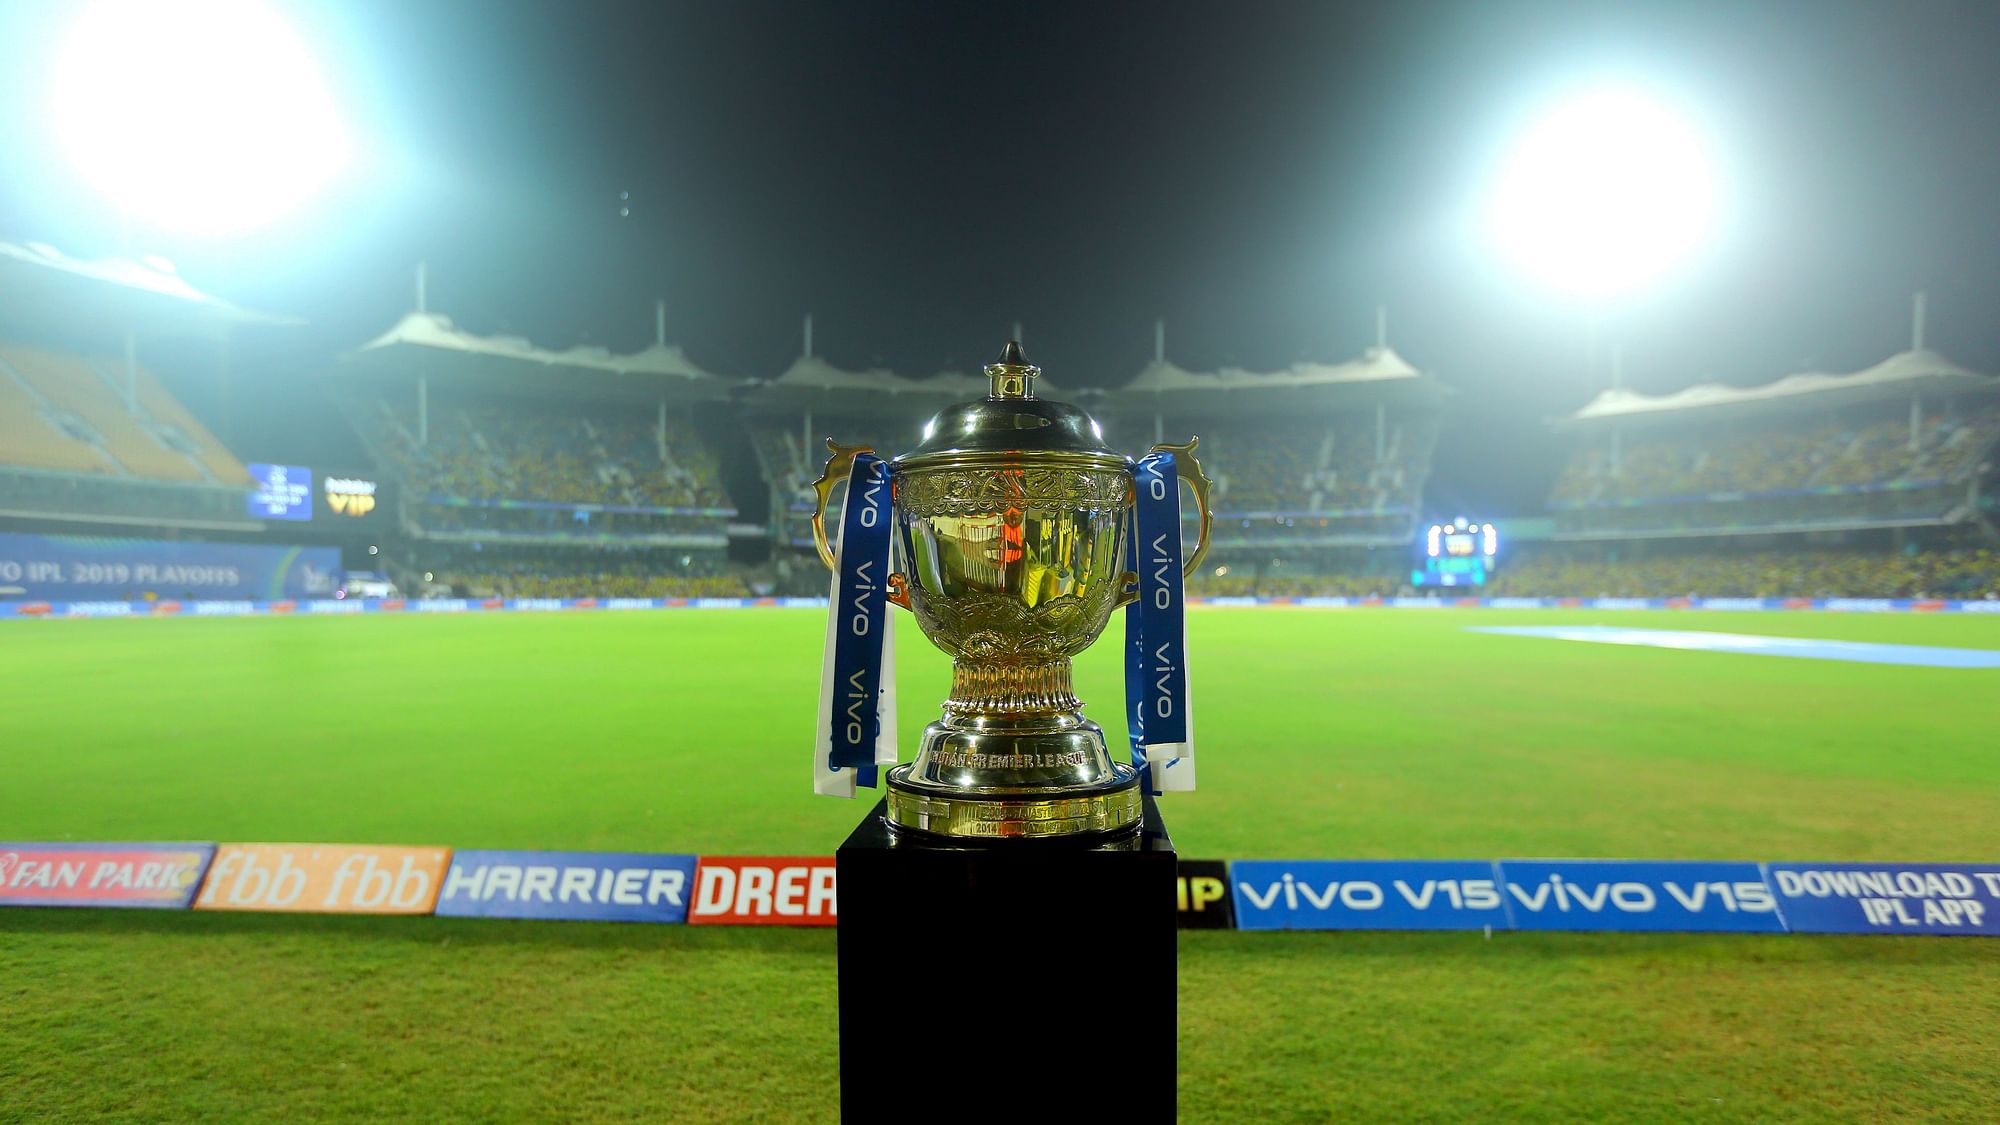 Indian Premier League 2020 IPL 2020 to be Held in UAE, Check Date, Time and Schedule